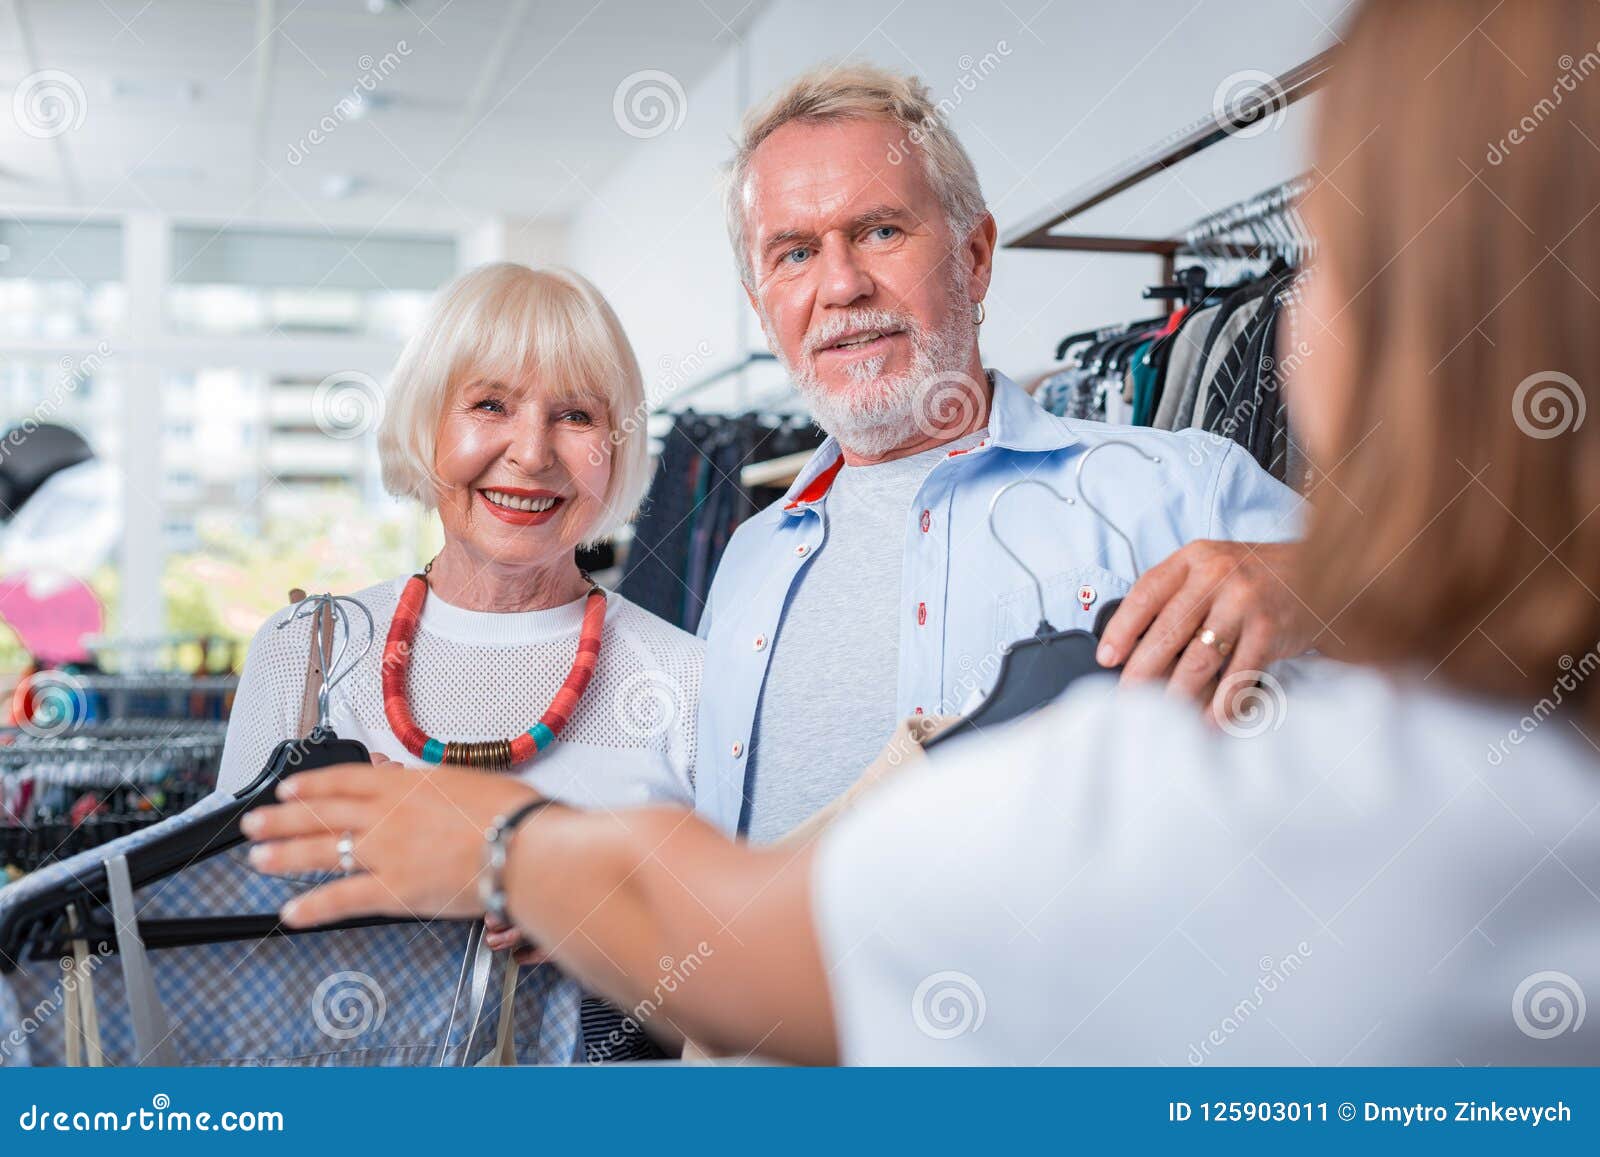 Adorable Elderly Couple In Front Of Cashier Desk Stock Image